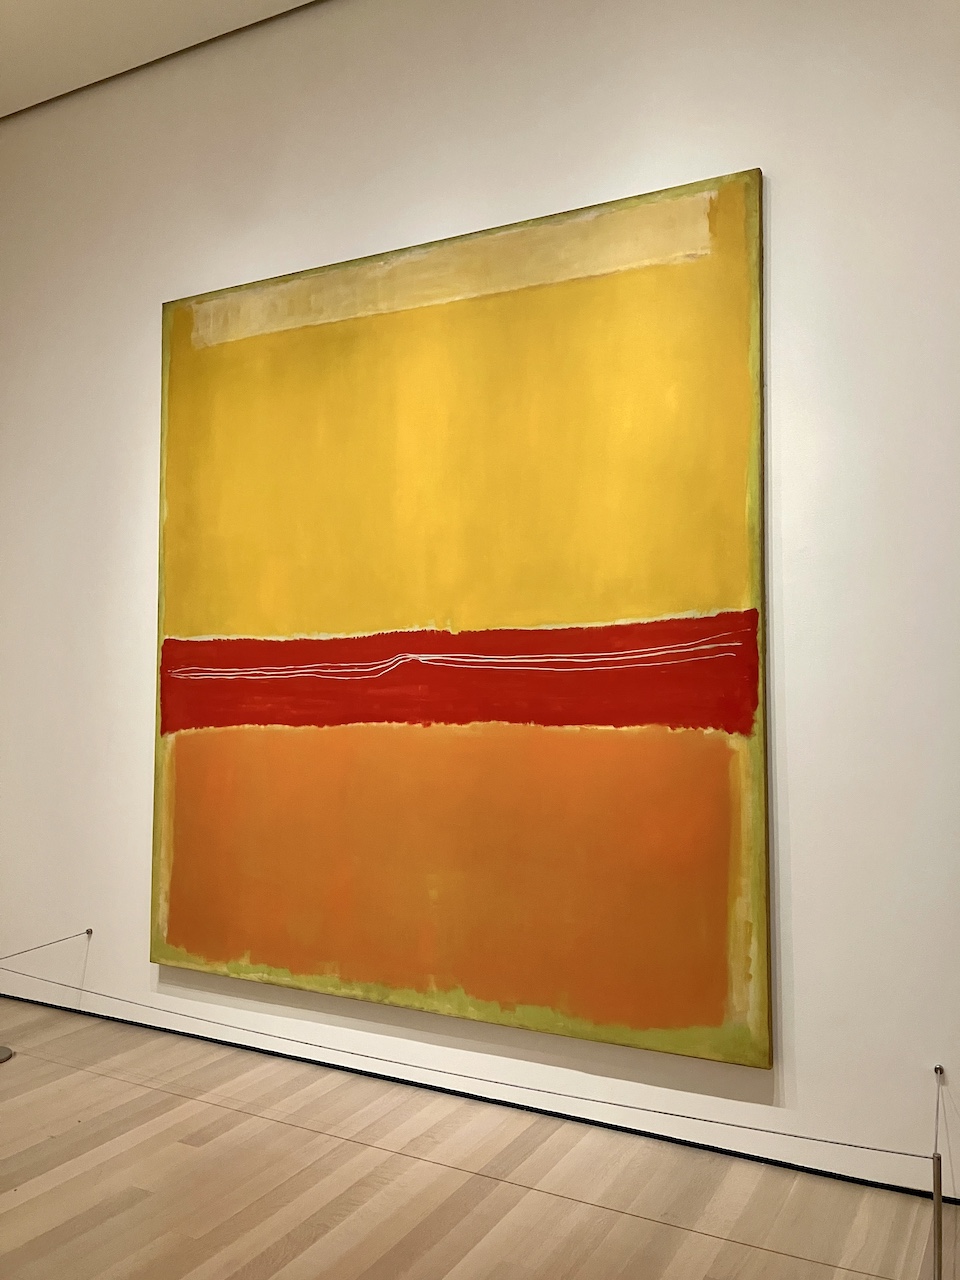 A large original Mark Rothko colour field painting at the Museum of Modern Art, New York City | MoMA | By Kerwin